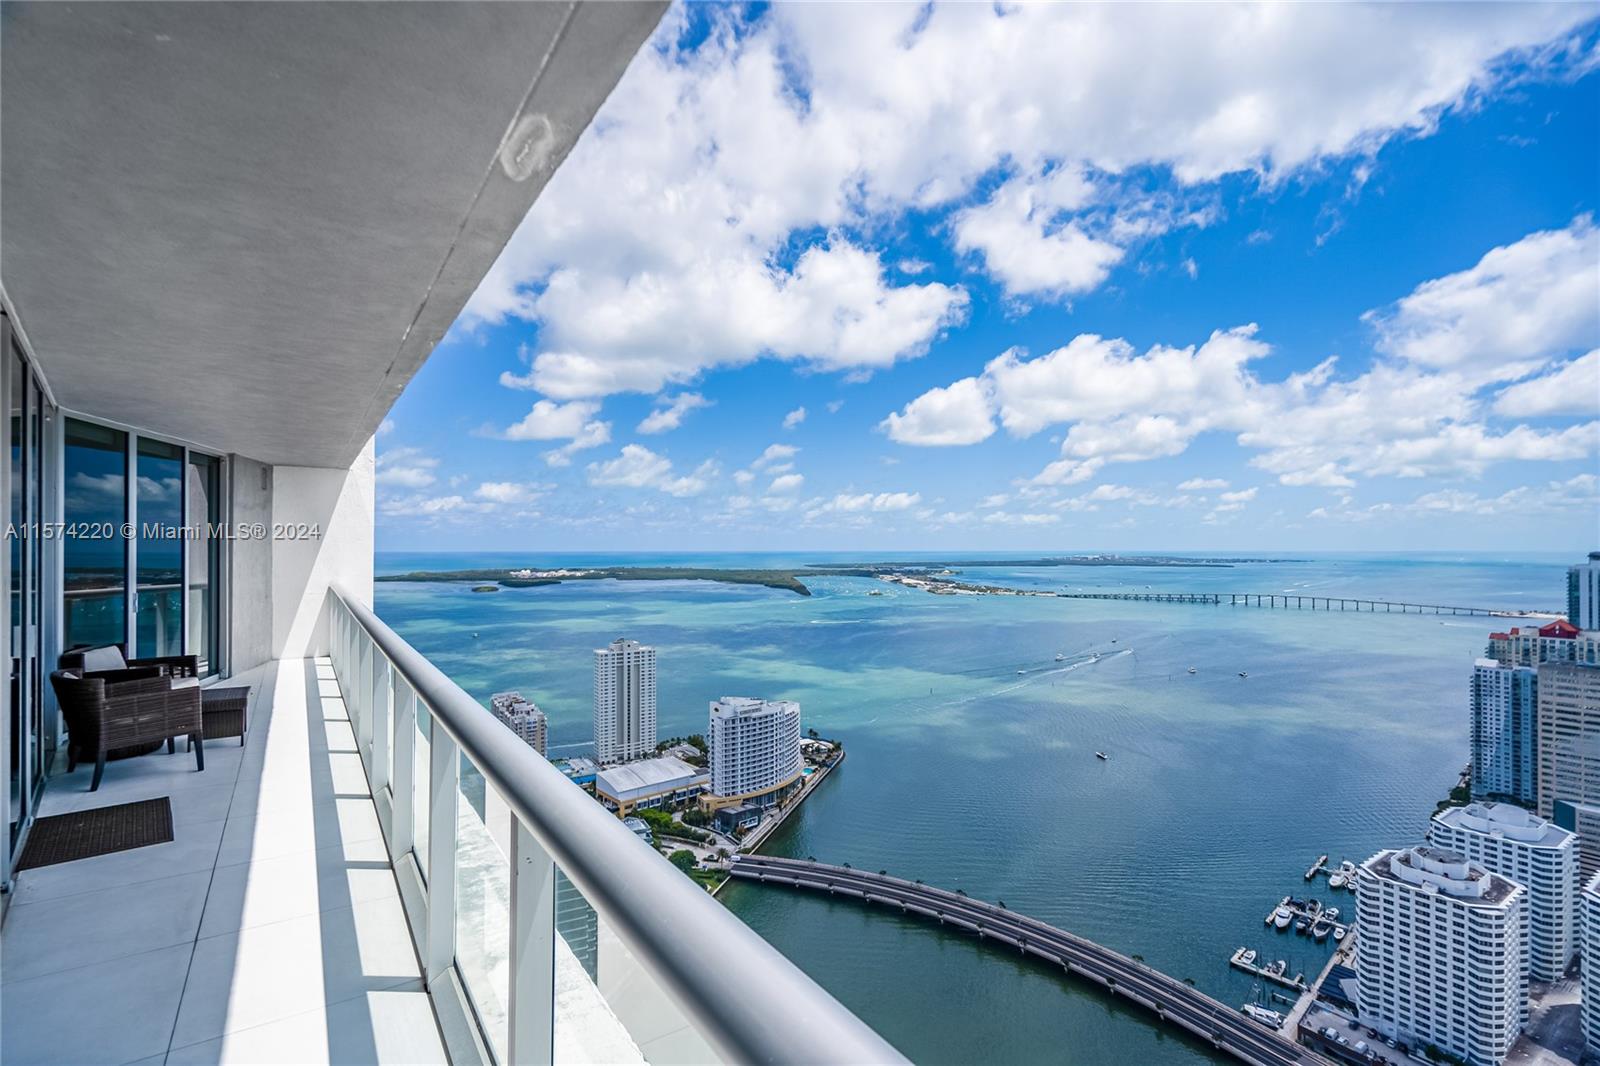 This stunning 2-bedroom plus den condo on the 54th floor offers a breathtaking panorama of the bay and the vibrant Brickell skyline. With 1,450 square feet of expansive living space and floor-to-ceiling windows with open kitchen and porcelain tile floor. Designed by renowned firm Arquitectonica and interiors inspired by Philippe. 5 Star amenities including, 2 pools, Spa, Gym, Valet, 24 hour Concierge, smart building technology and much more. Fantastic location by Brickell City Center, Mary Brickell Village, Whole Foods, train station, restaurants, shopping, arts and entertainment. Assigned parking and pet friendly. OK to lease 1st year - Rental period is 6 months minimum as per condo rules - 1 assigned parking space is included